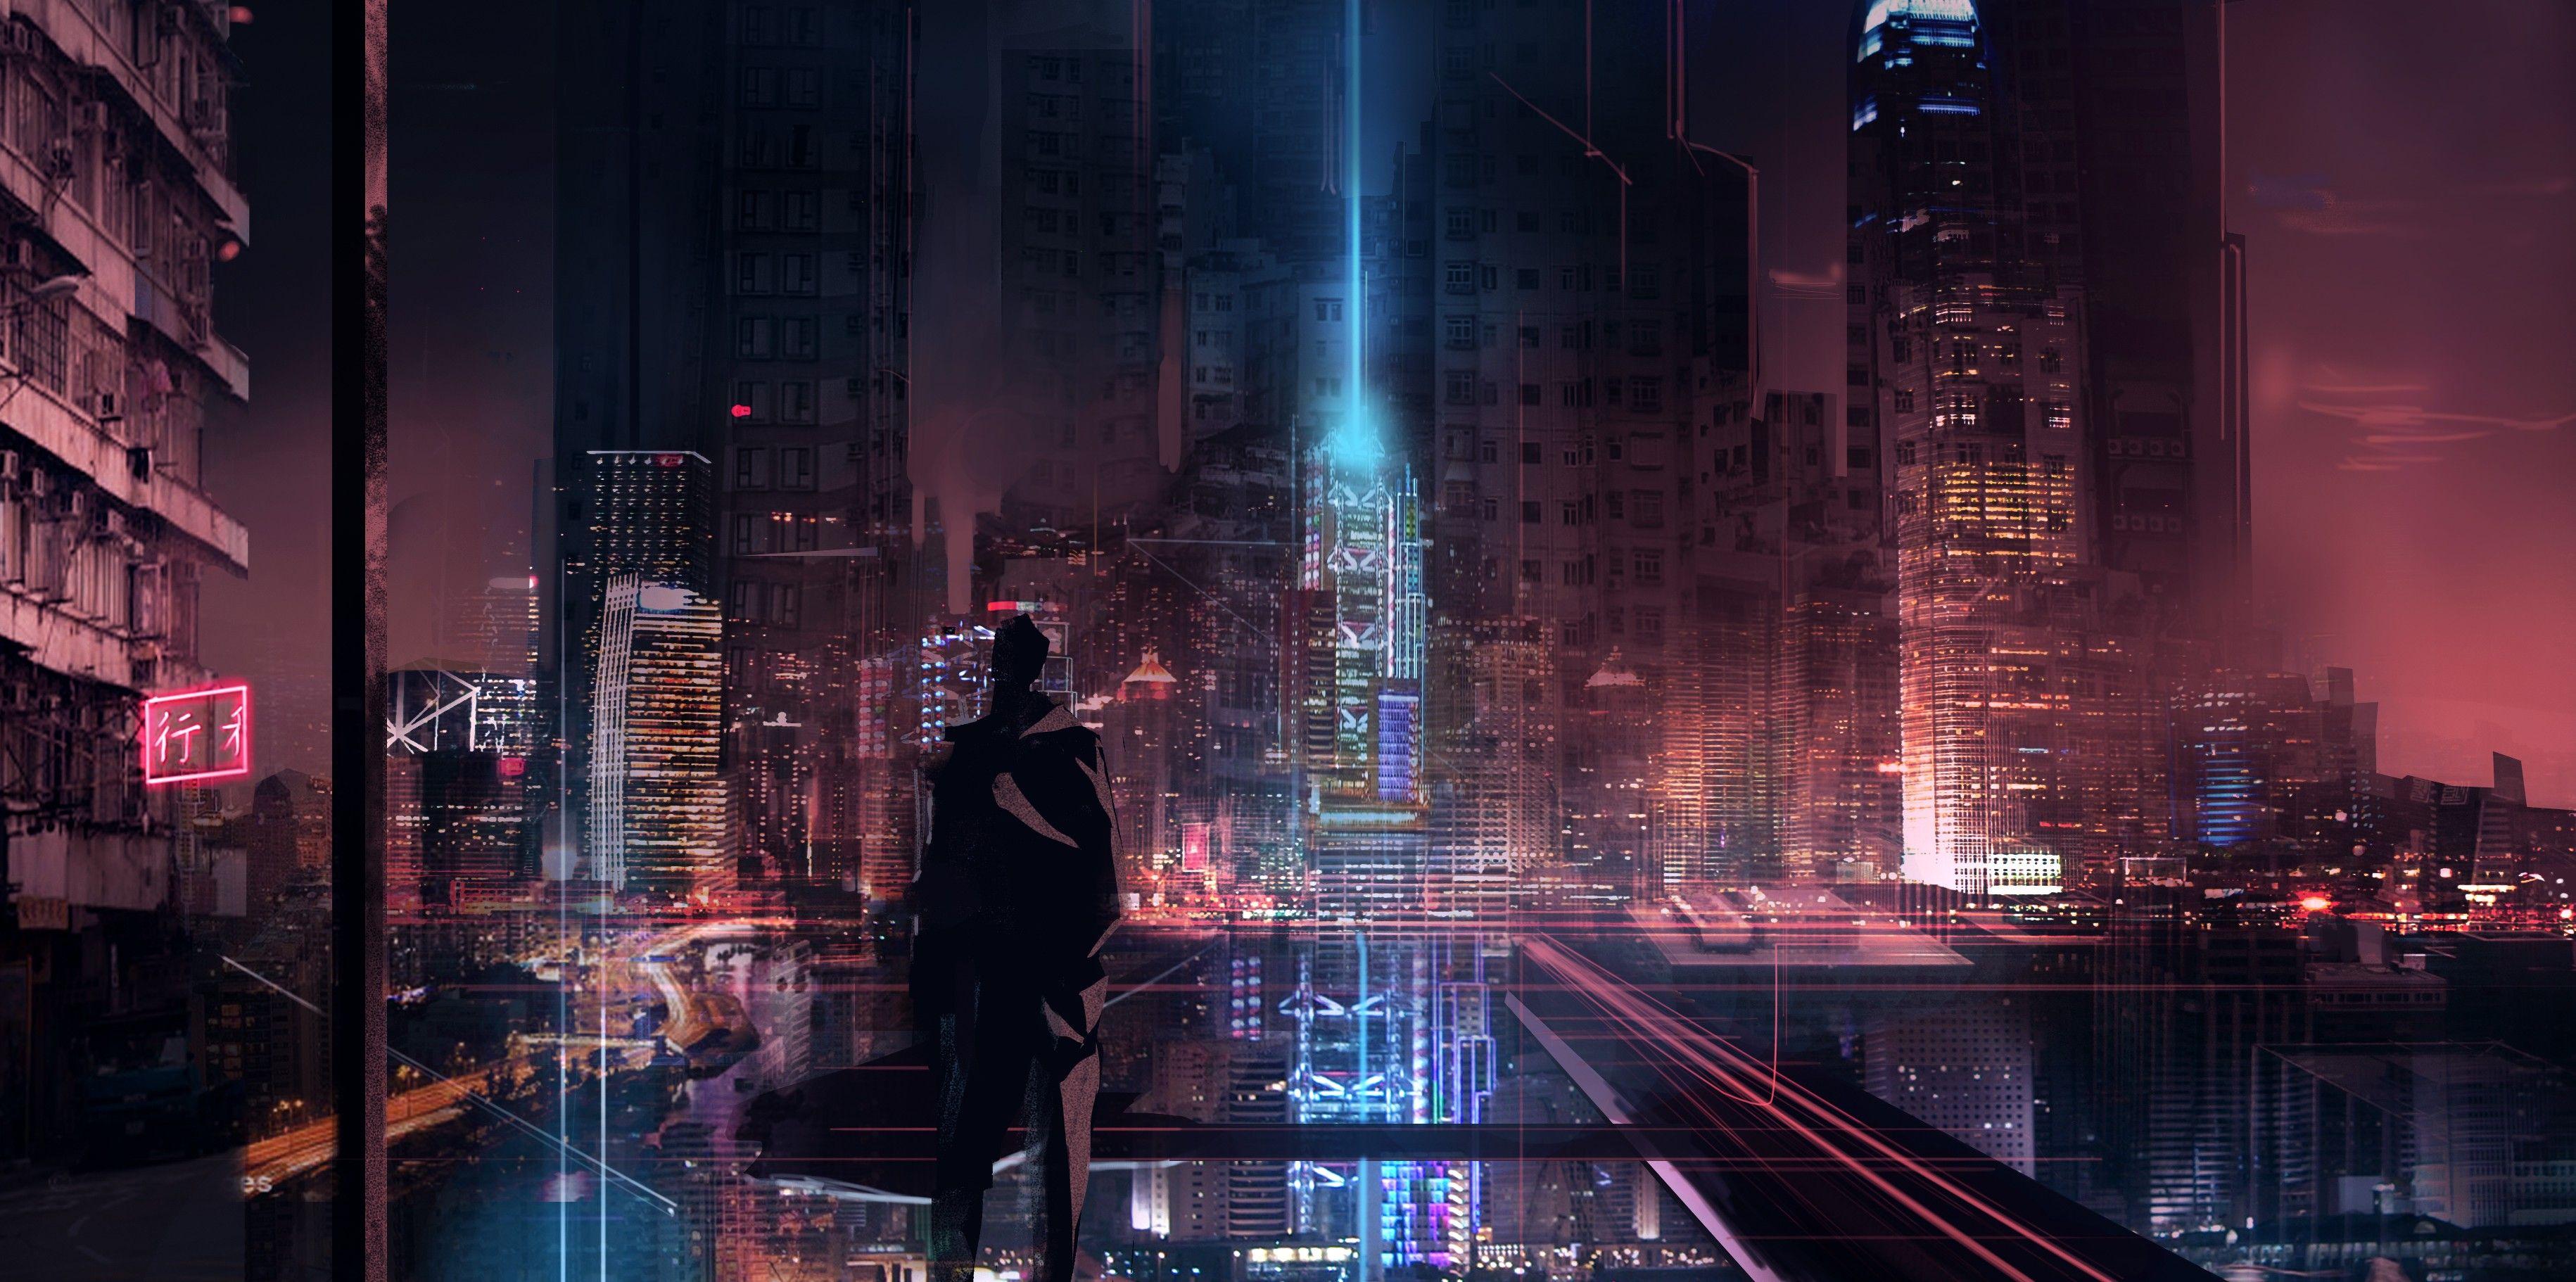  Cyber  City  Wallpapers  Top Free Cyber  City  Backgrounds  